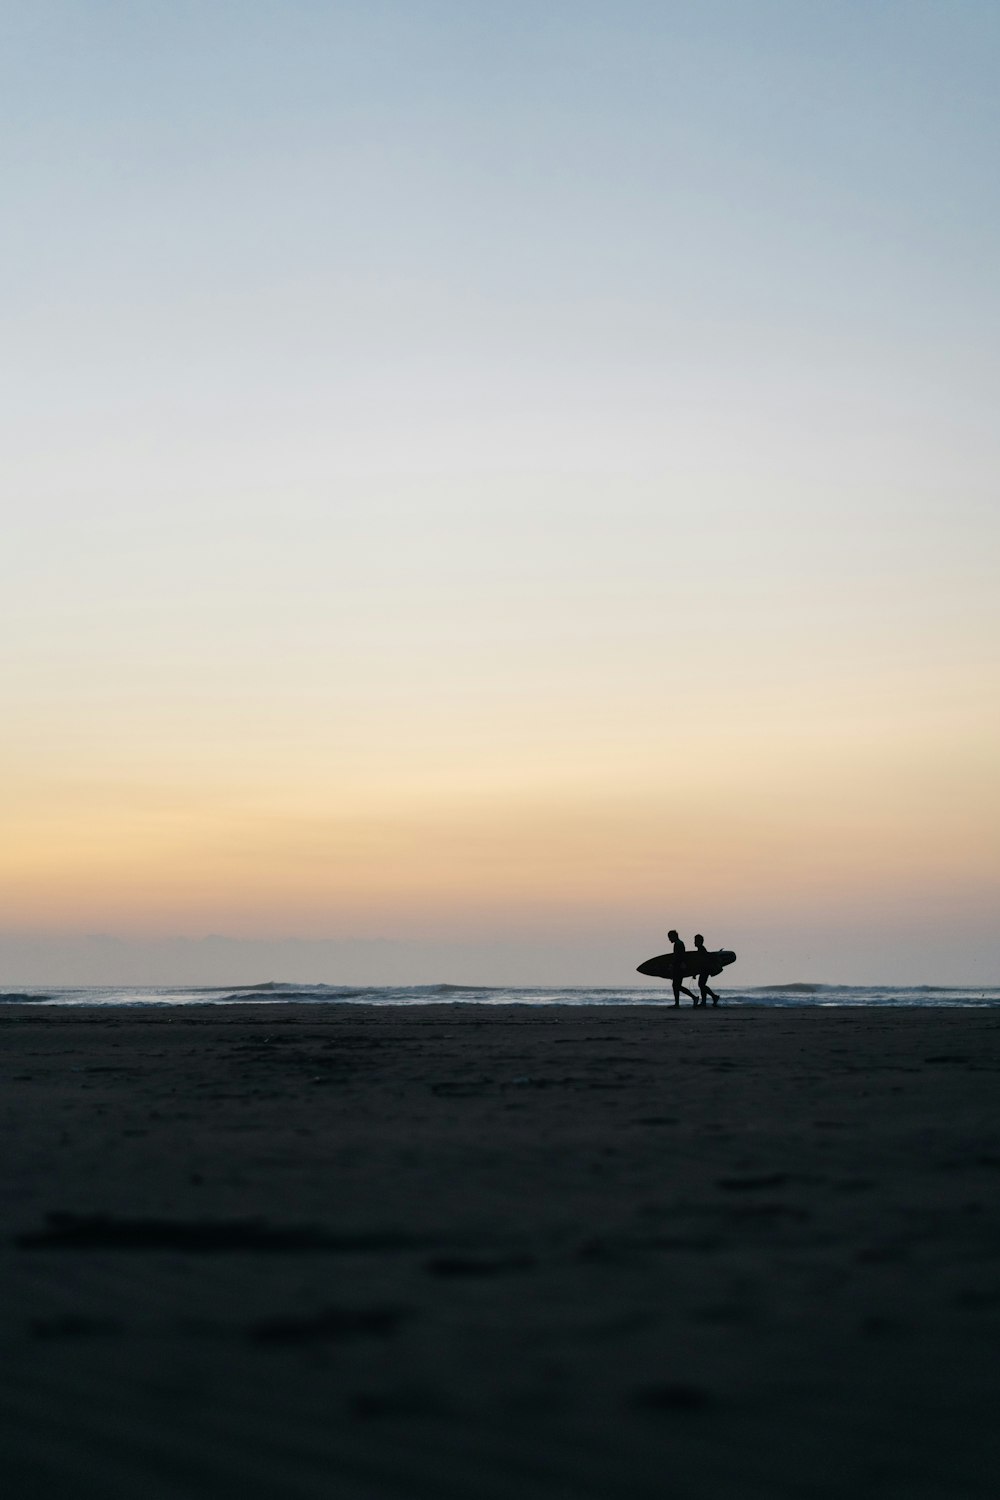 person riding on horse on beach during sunset